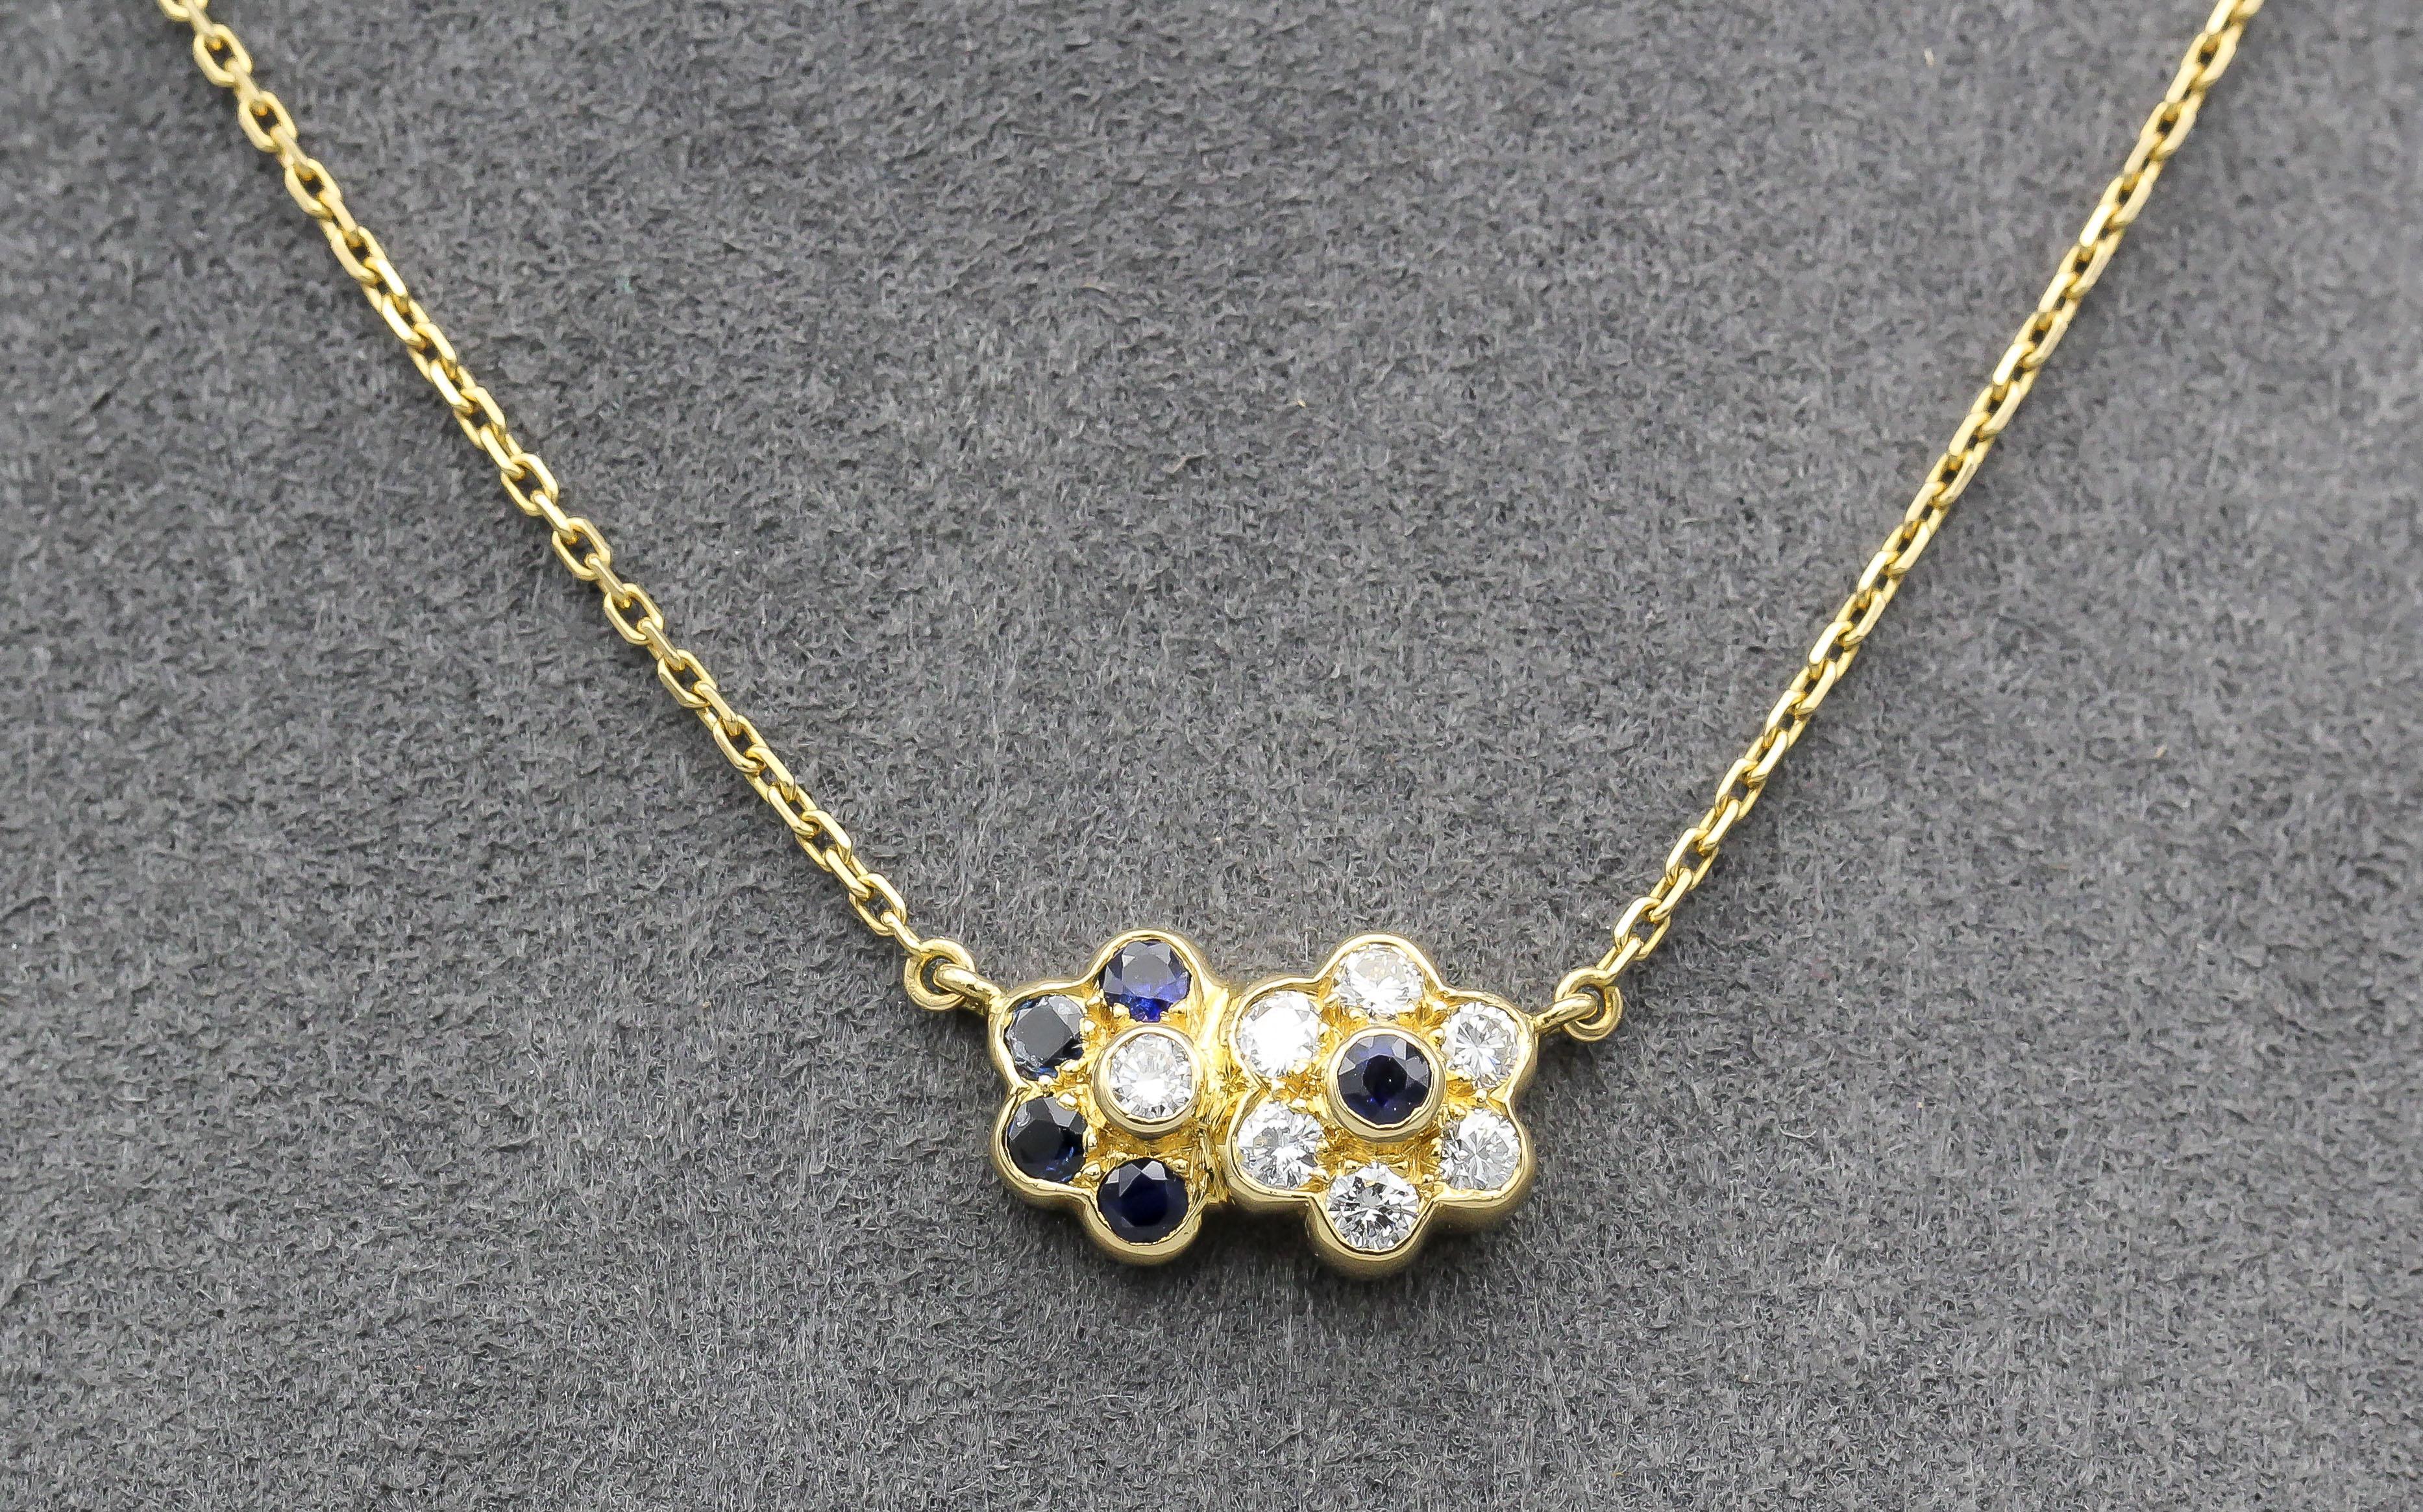 Introducing the Van Cleef & Arpels Sapphires and Diamond 18K Yellow Gold Pendant Necklace, a masterpiece of luxury and craftsmanship that captures the essence of timeless elegance. This exquisite necklace is designed as two interlocked flowers, with